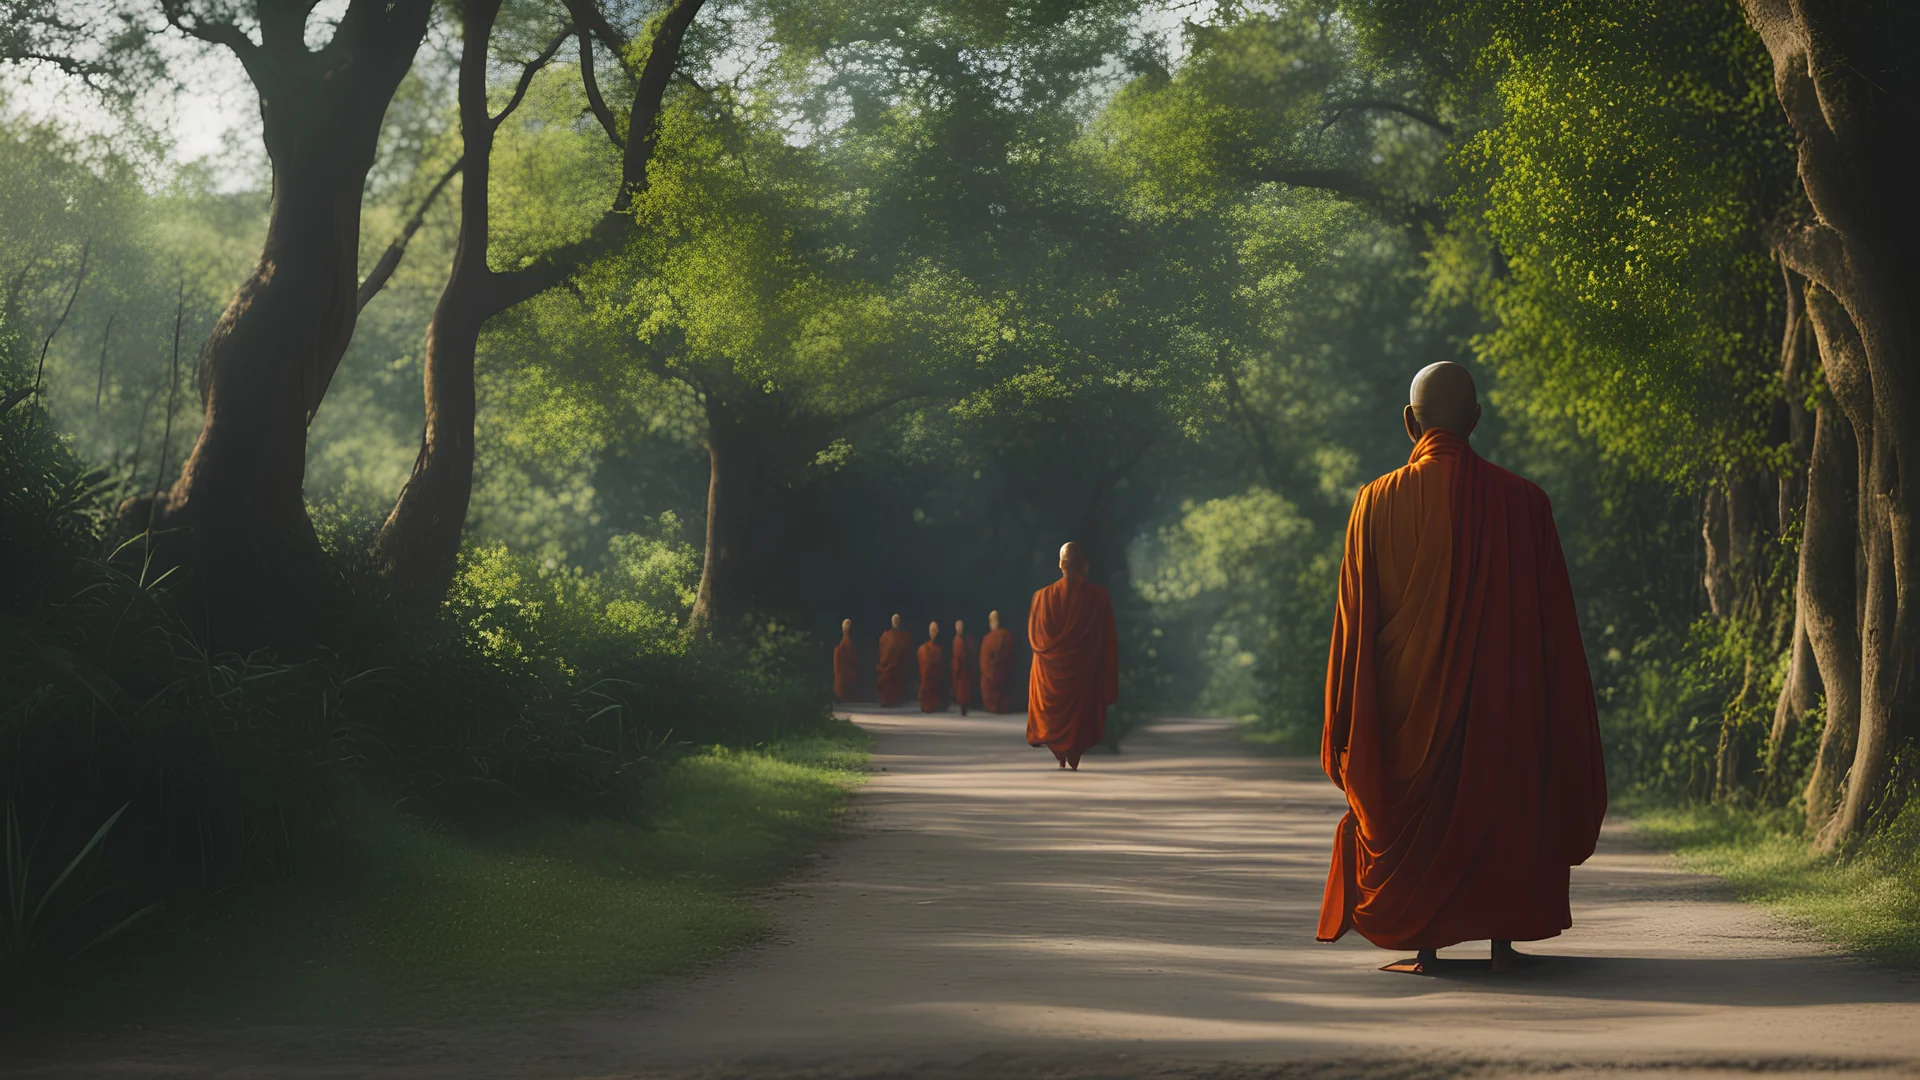 Buddha monk The king embarks on his journey to the monastery, where he sits in silence, observes nature, and confronts internal challenges.4k